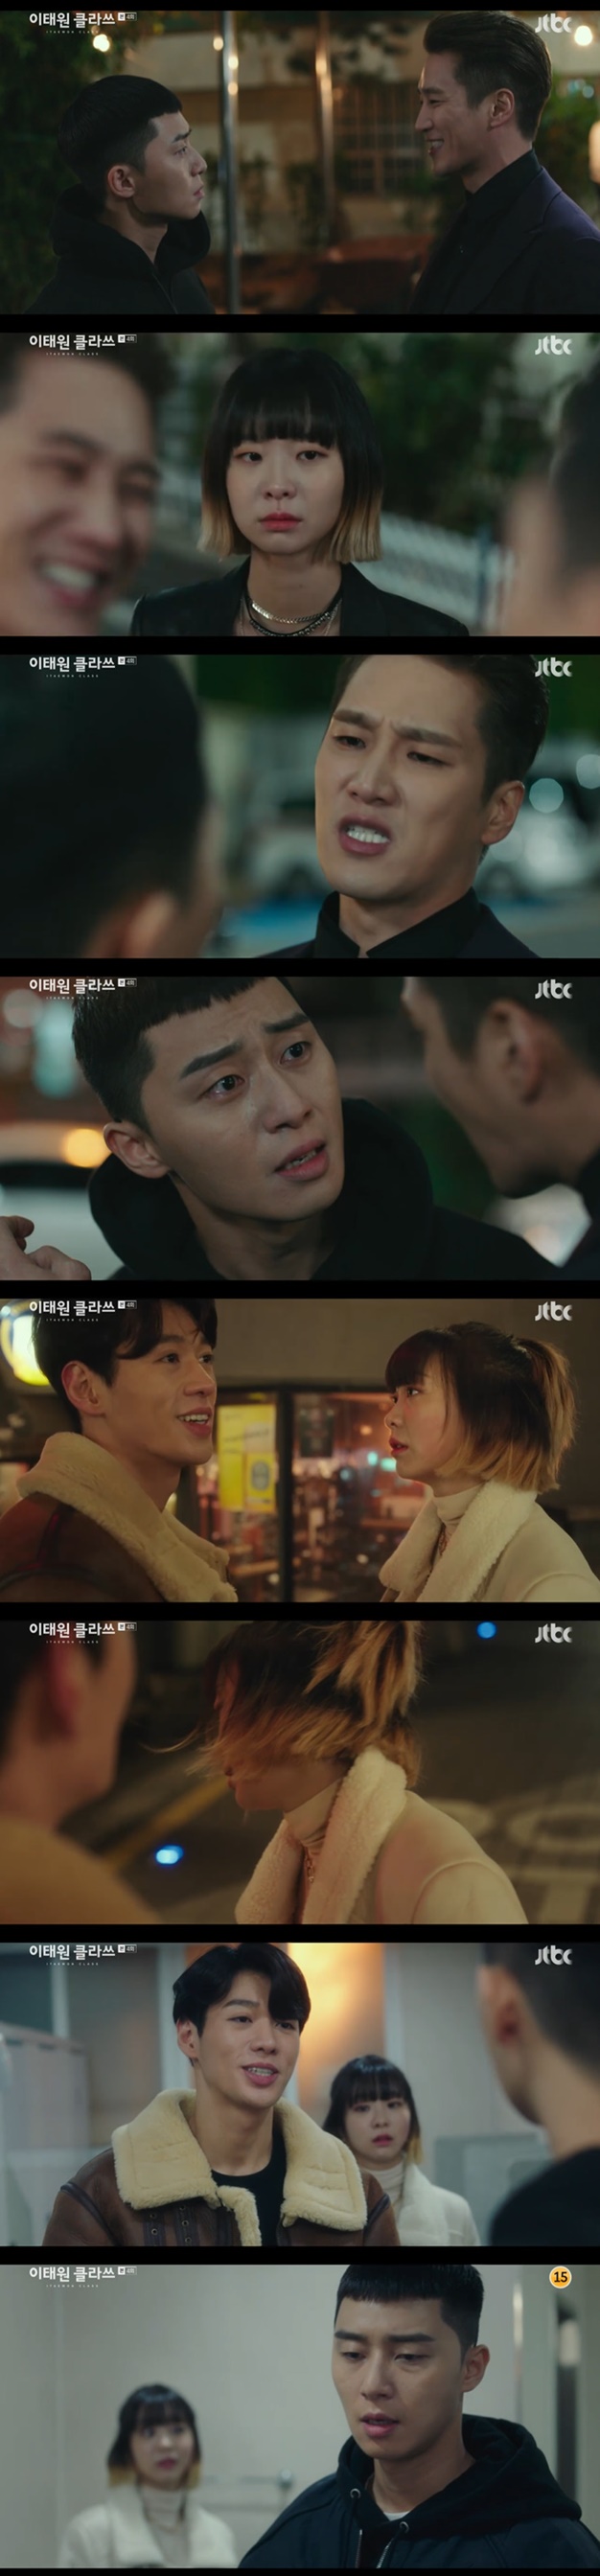 Itaewon Klath Kim Da-mi decided to become single night manager with a favorable feeling to Park Seo-joon.In the JTBC gilt drama Itaewon Klath (playplayplay by Gwangjin, directed by Kim Sung-yoon and Kang Min-gu), which was broadcast on the afternoon of the 8th, Park Seo-joon warned against the provocation of Jang The Fountainhead (played by Ahn Bo-hyun).After becoming an adult, Park and The Fountainhead were reunited in another bad performance at the police station.Jang Geun-soo (Kim Dong-hee), the half-brother of the Fountainhead, entered the high school student status and was reported to the Park Sae Roys Sanbam.The moon night was suspended for two months.The Fountainhead said he killed his father and provoked him to play because he said, Roy is a life-sucking roy because of me.But Roy said, Ive had it all the time. Ill hold it for another six years. My plan is 15 years. Your statute. stubborn.So you wait, he said.Joy (Kim Da-mi) found his attempted murder priors and articles that were intertwined with Jean The Fountainhead while searching for the name of the Roy on social media after feeling fond of the Roy.Joy was twenty years old two months later and was forced to date by a meeting partner.Joy met Roy where he accidentally ran away, and Roy punched the violent man in revenge instead of Joy.Park fled with SuA (Kwon Na-ra) and Joy, who were waiting for him, and a three-way face-to-face was held.Joy said to Roy, who is about to break up, I do not want to live in debt, but how about a cup of coffee? The store promotion is a specialty field.In the absence of Roy, SuA asked, Do you like Roy? And Joy asked, I have an interest.So, SuA said, Youre not the kind of kid you can handle. Im sorry youre the reason youre the new Roy.Joy responded, How do you know Ive been suspended for me? Did your sister report it? Without being able to do so, SuA confessed, I am the one who reported you, and asked, Do you like me? Still, Park said, Im sorry but I still like it.SuA felt more sorry for Park Sae-ro than feeling superior to Joy.After SuA left, Park and Joy talked about their drunkenness.Joy asked, Did you feel betrayed by a friend you liked for more than 10 years? But Park said, It is your job, your life is faithful. It is not a business, and your heart is not a gift and take.Then Roy expressed his sadness from the Janga. I cant sleep well at night. I miss it, I feel lonely, I get angry.I wanted my life to be a little more bitter, Joy said, and once again felt a sense of genuineness in the face of Roy.Joy, thinking: I want to sweeten this mans life, secretly kissed the drunken, fallen-down Park Roy.After that, Joy went to the night and said, I will make my dream come true.